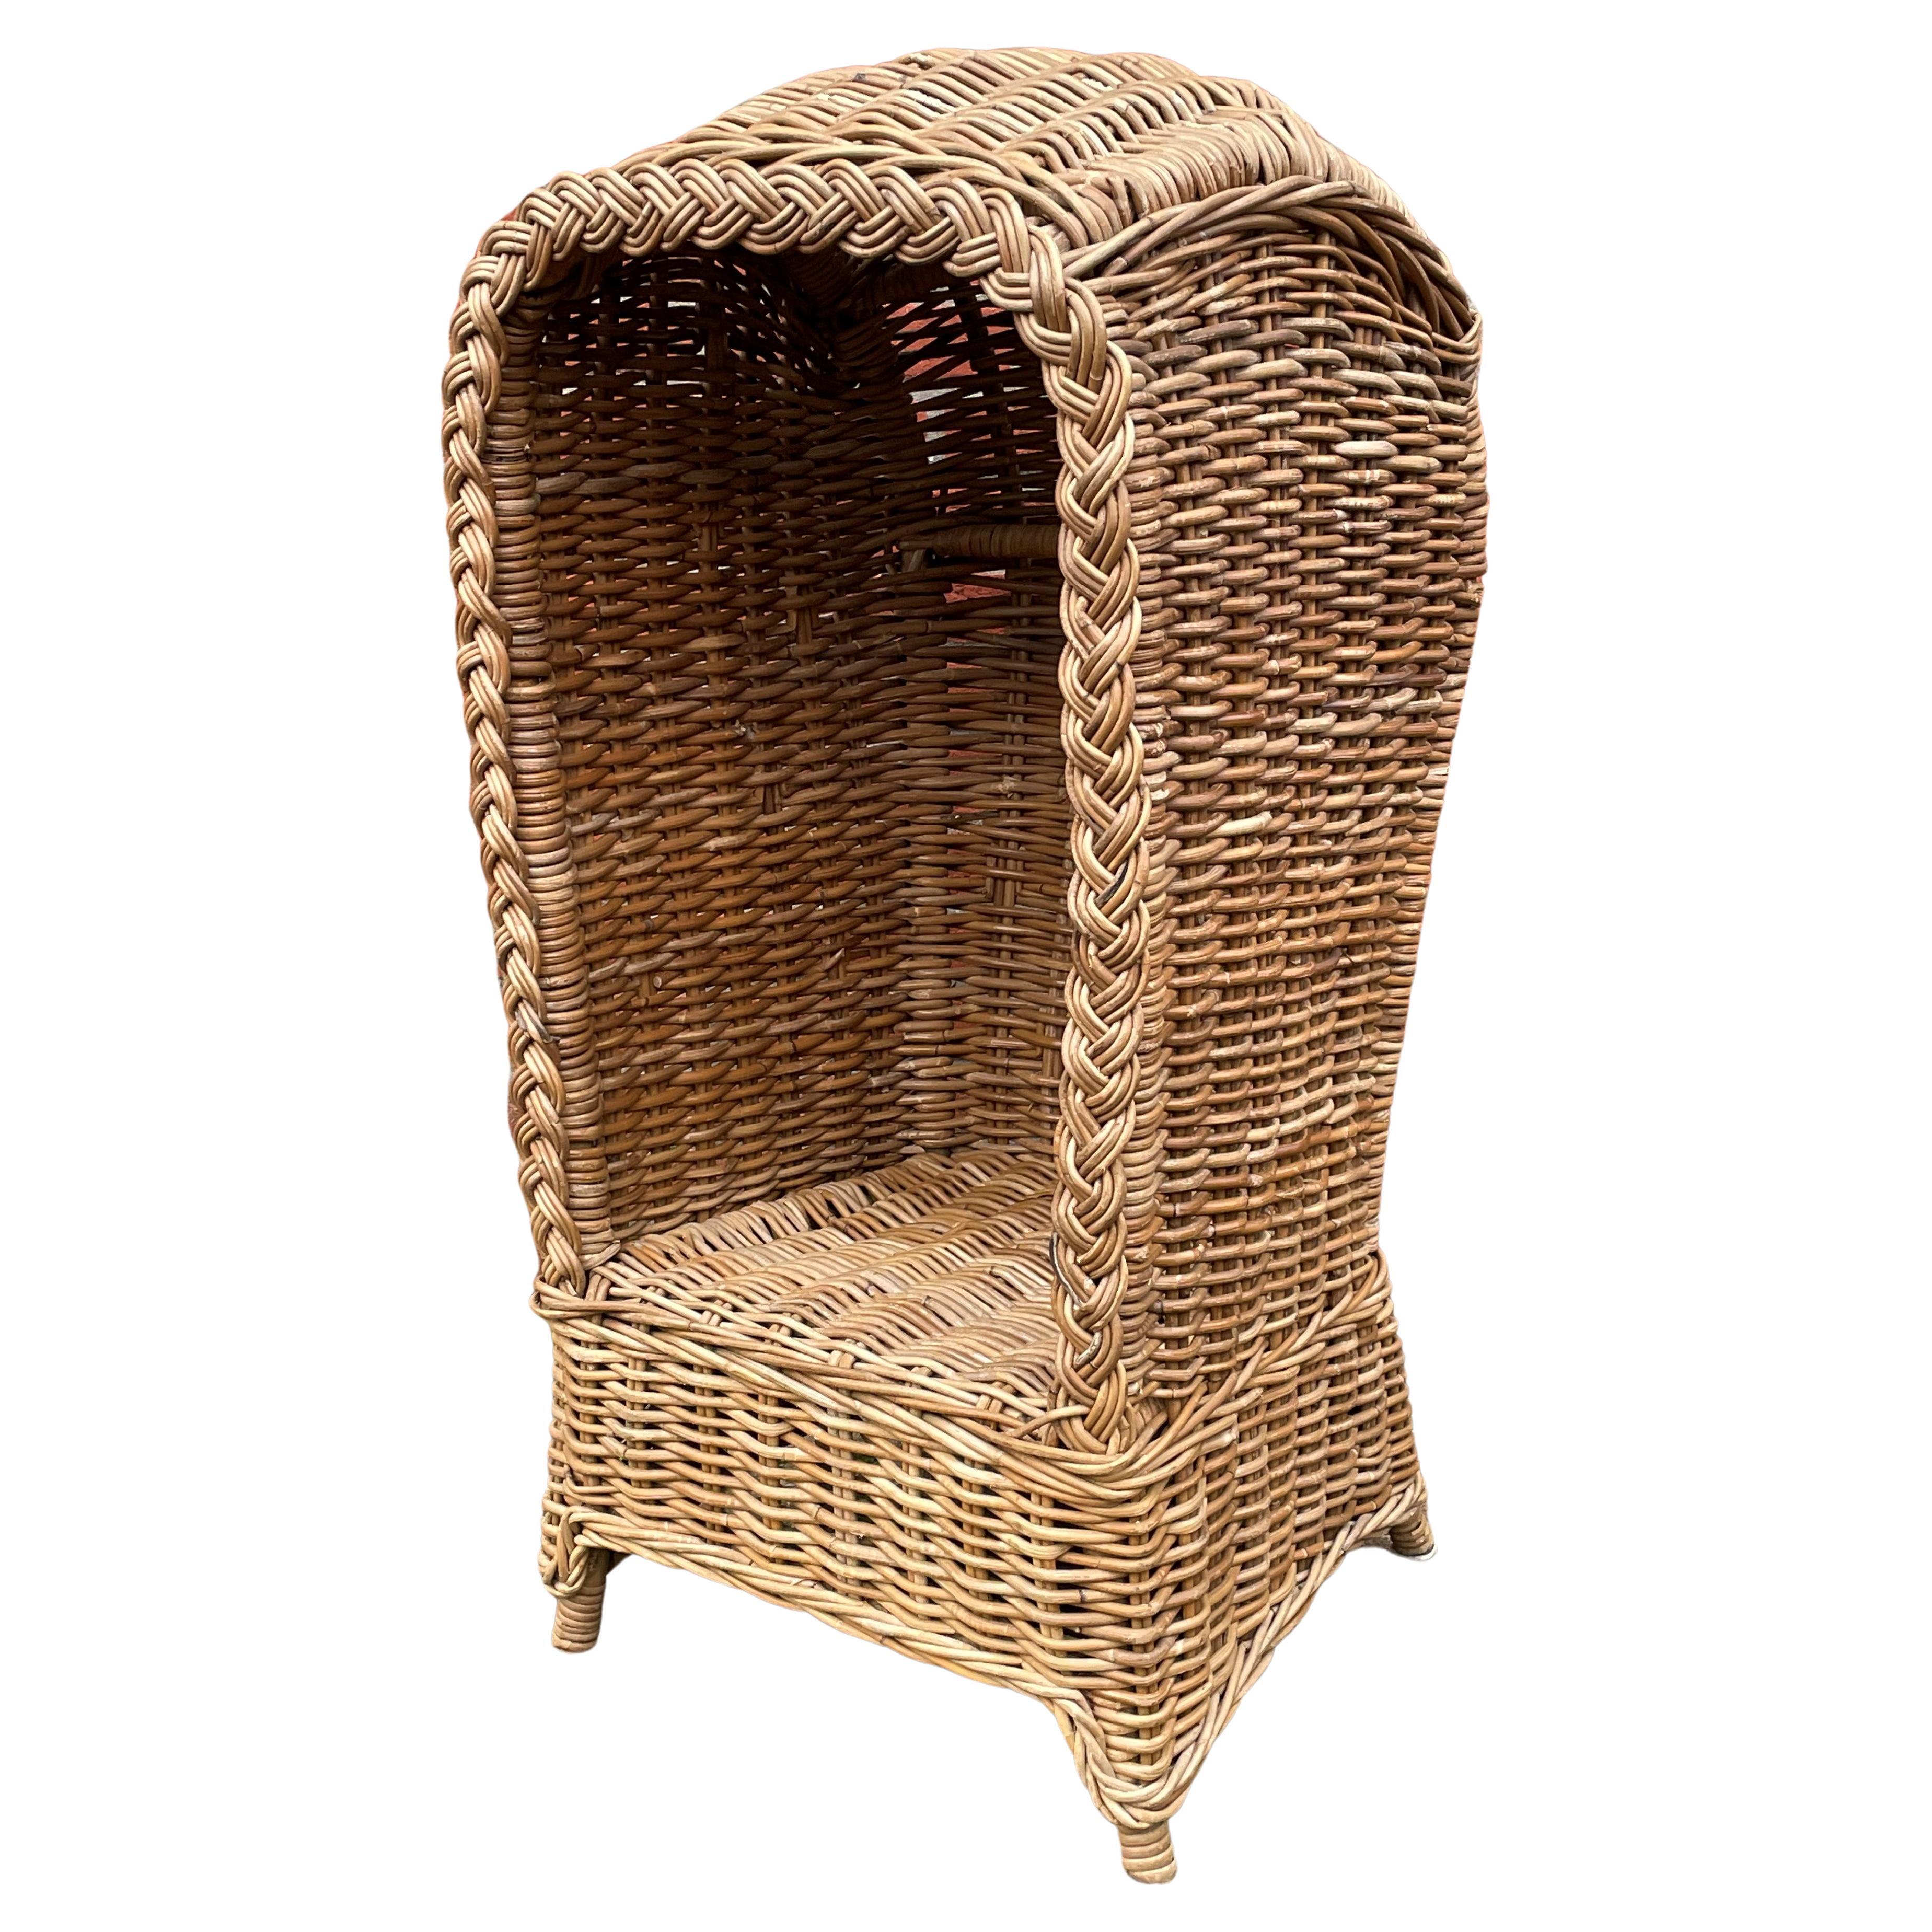 Very Rare & Super Decorative Antique-Like Hand Woven Rattan Beach Chair for Kids For Sale